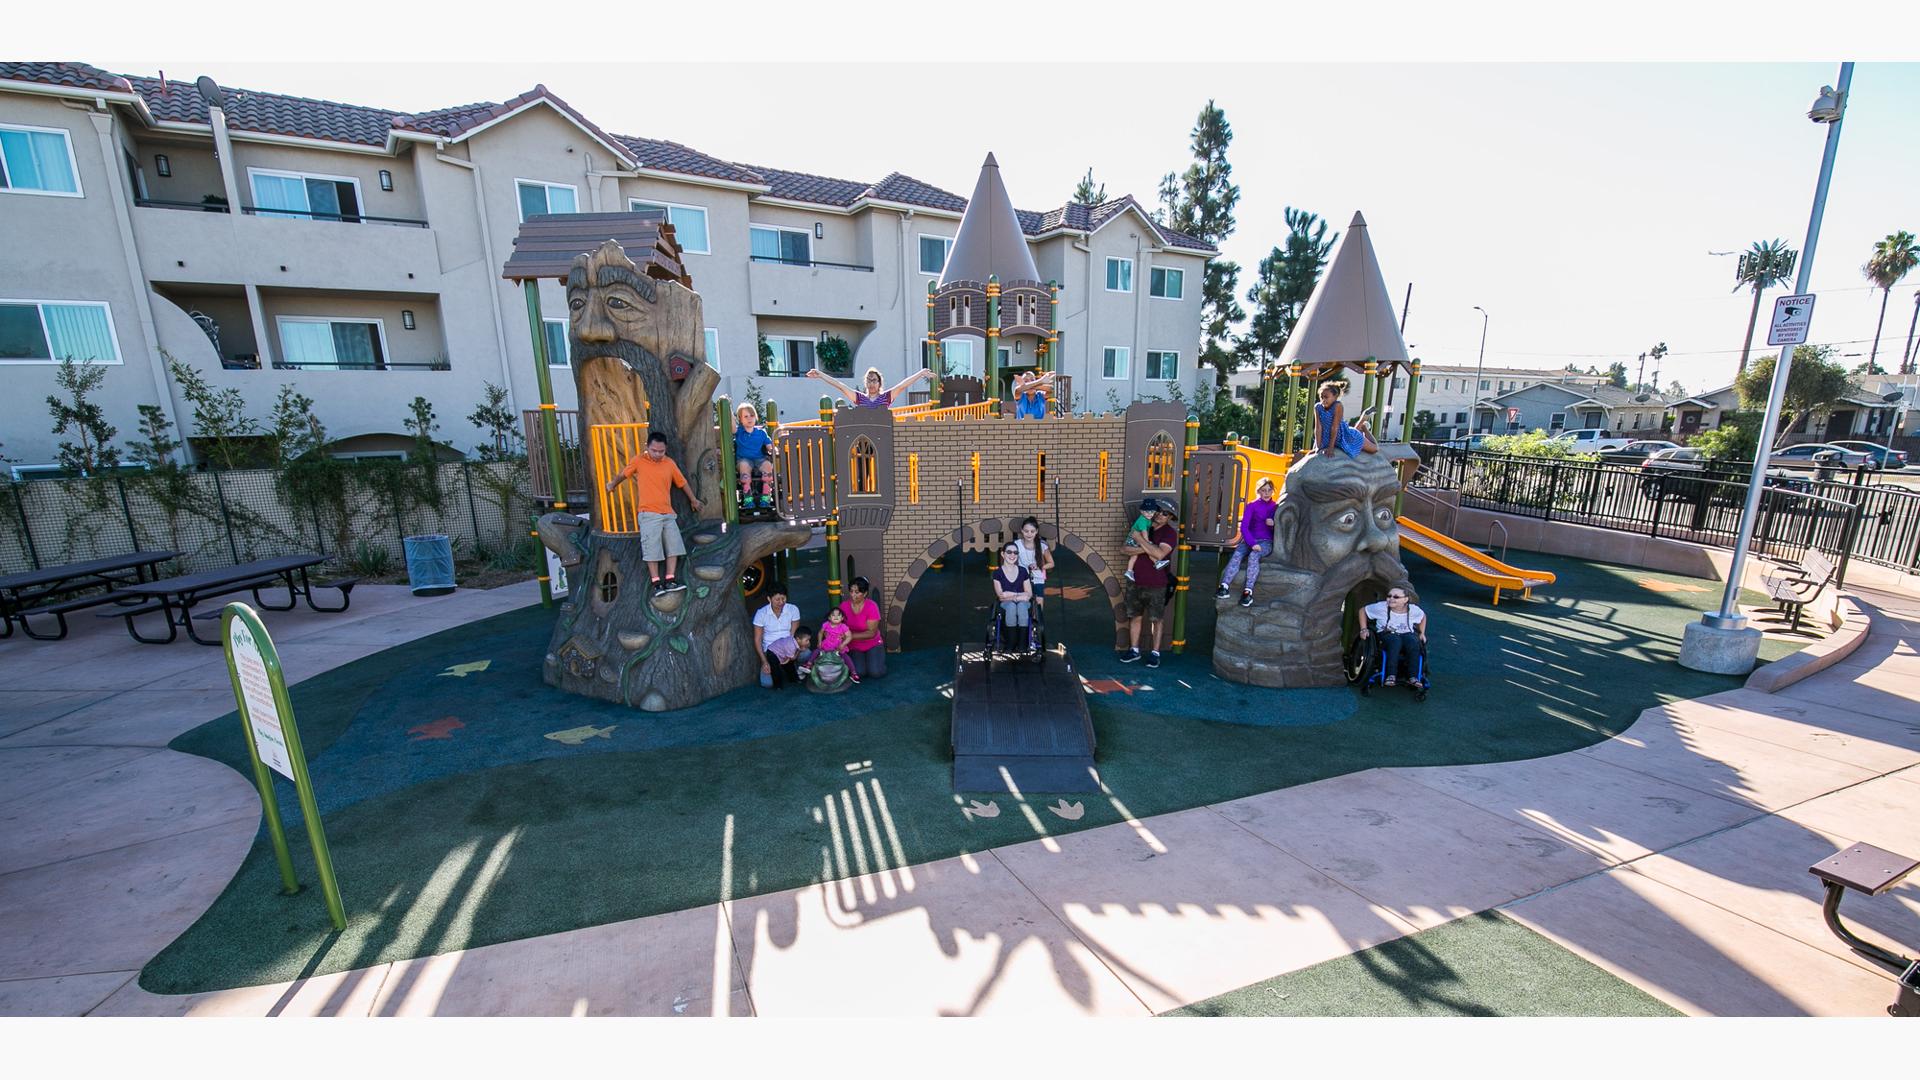 An custom all inclusive play structure disguised as a castle with ramp acting as a lowered draw bridge. Children of all ages and abilities gather and pose for a photo.